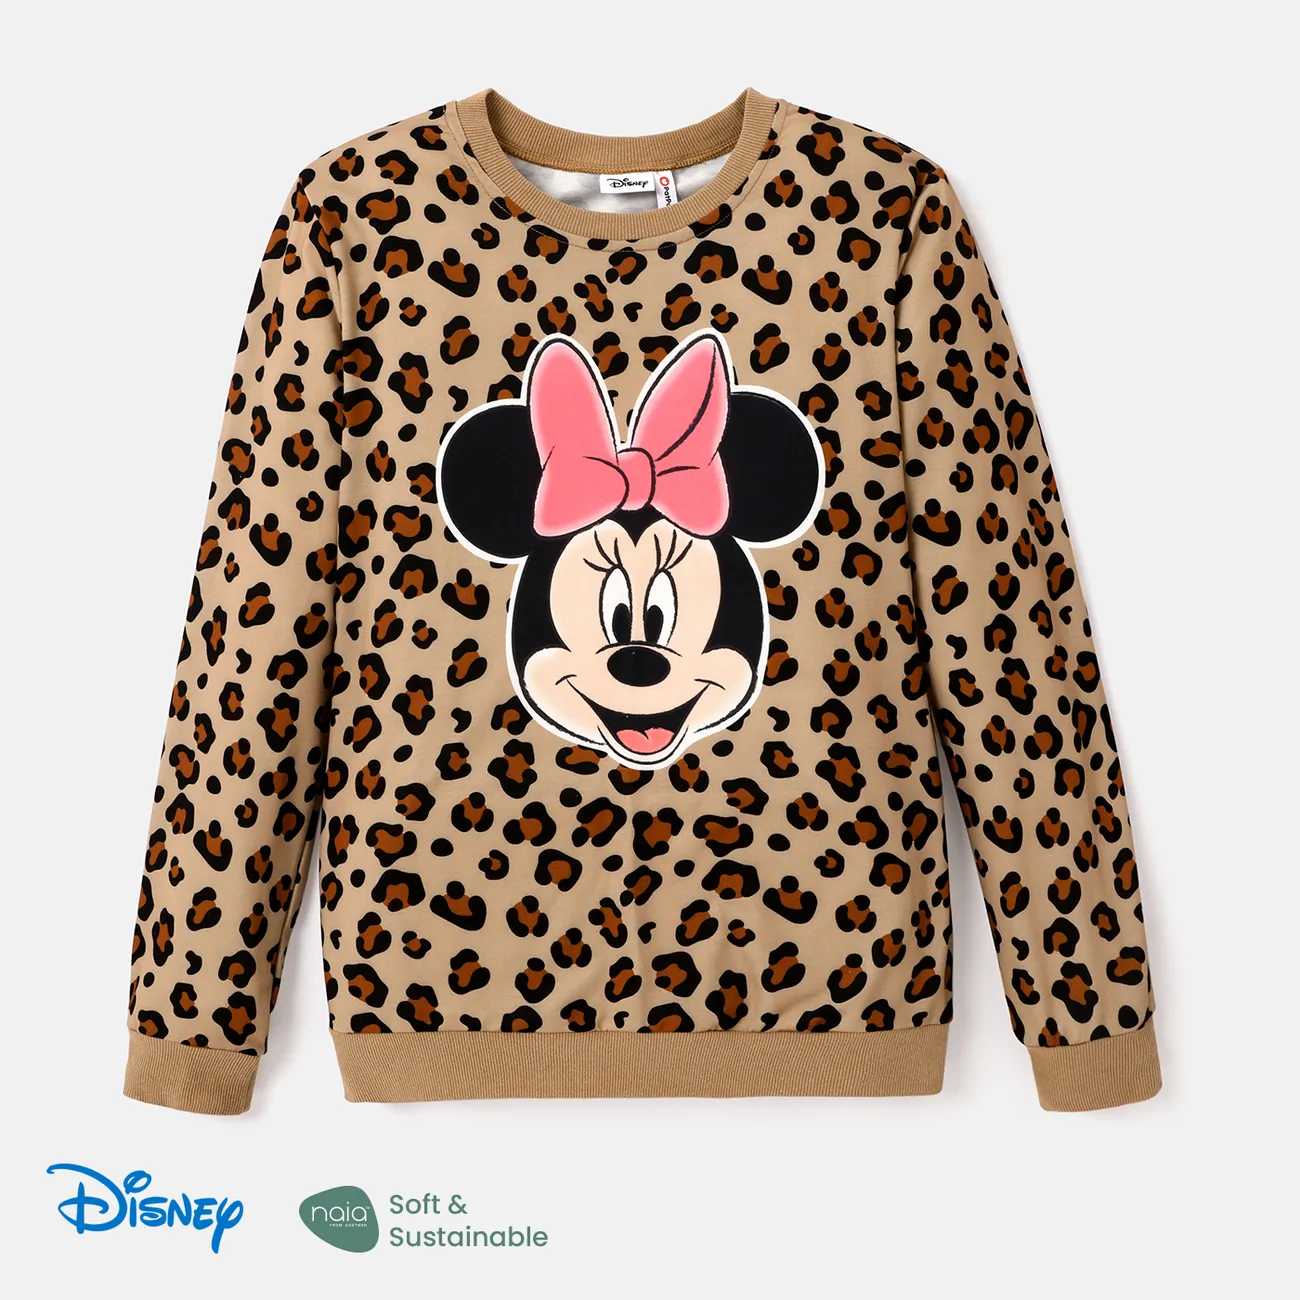 Disney Mickey and Friends Family Matching Letter & Leopard Print Long-sleeve Tops Brown big image 1